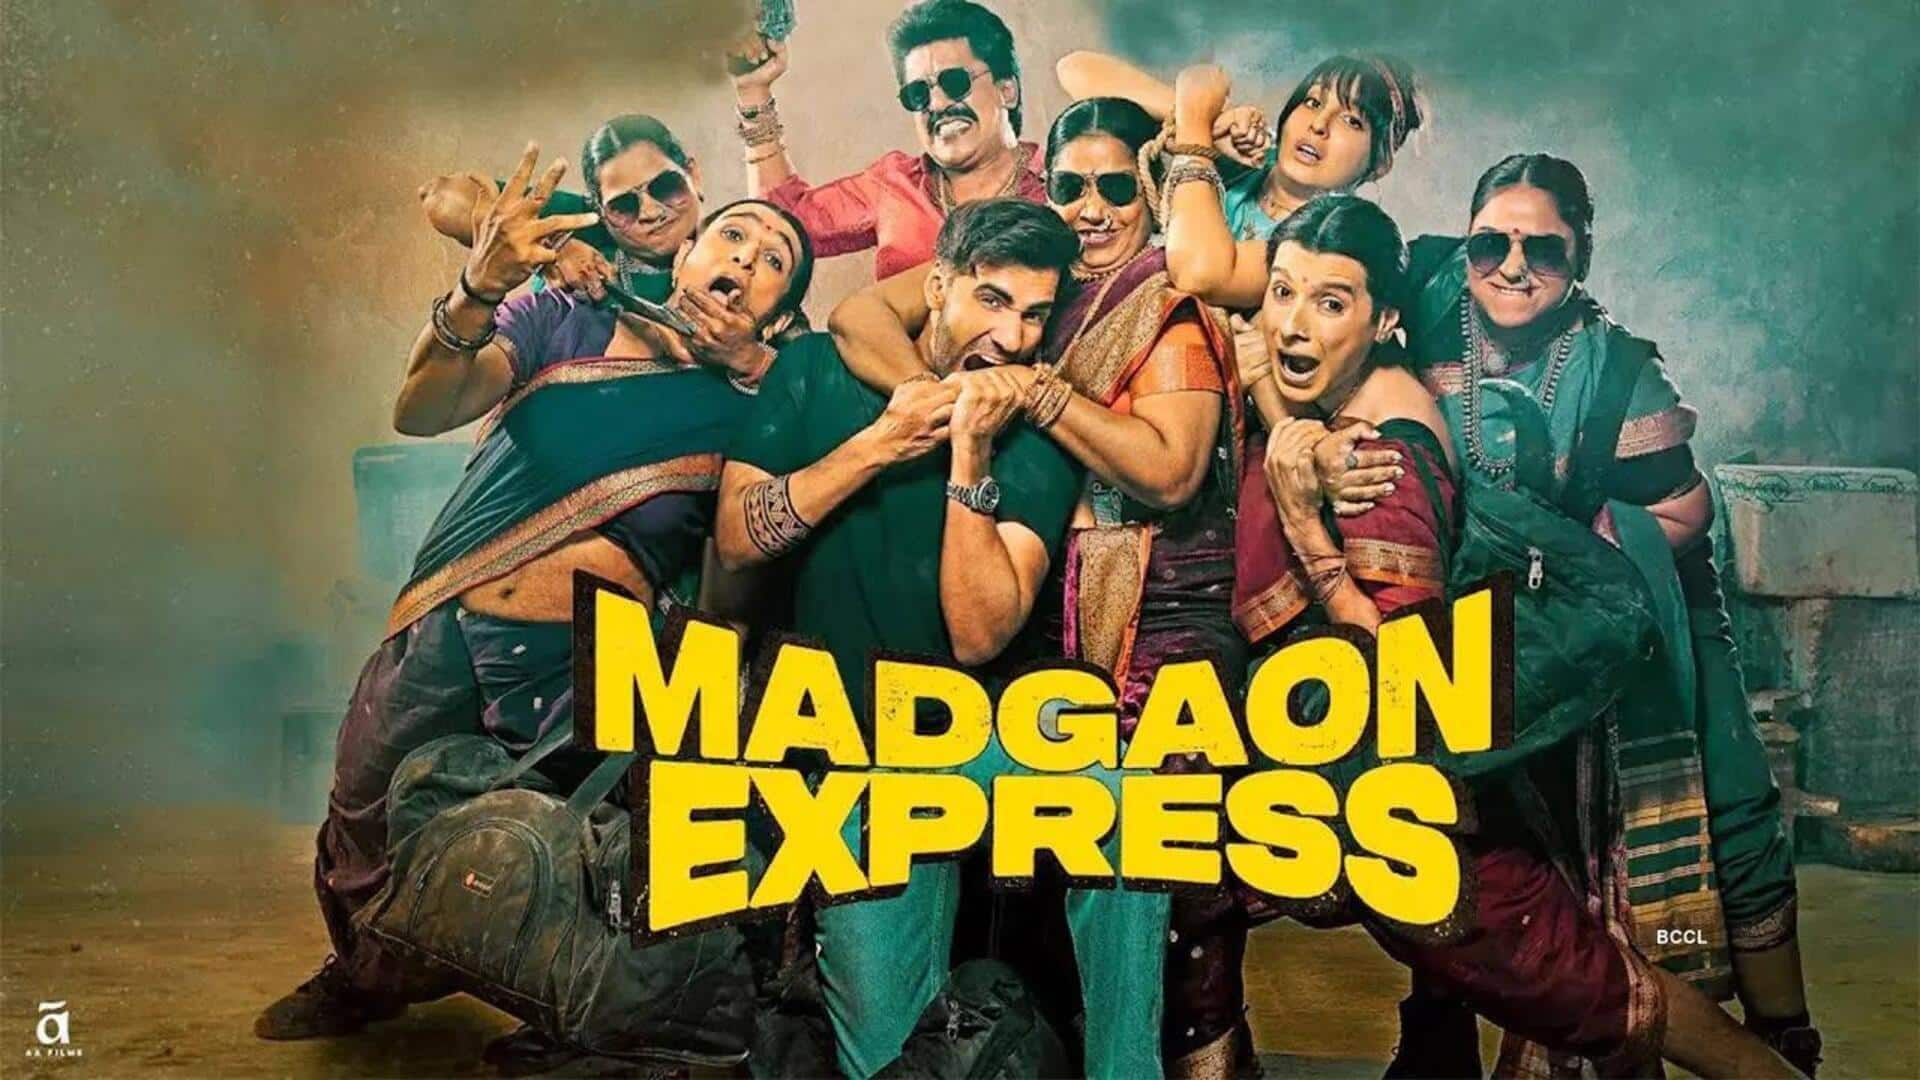 Box office: 'Crew' gives 'Madgaon Express' run for its money